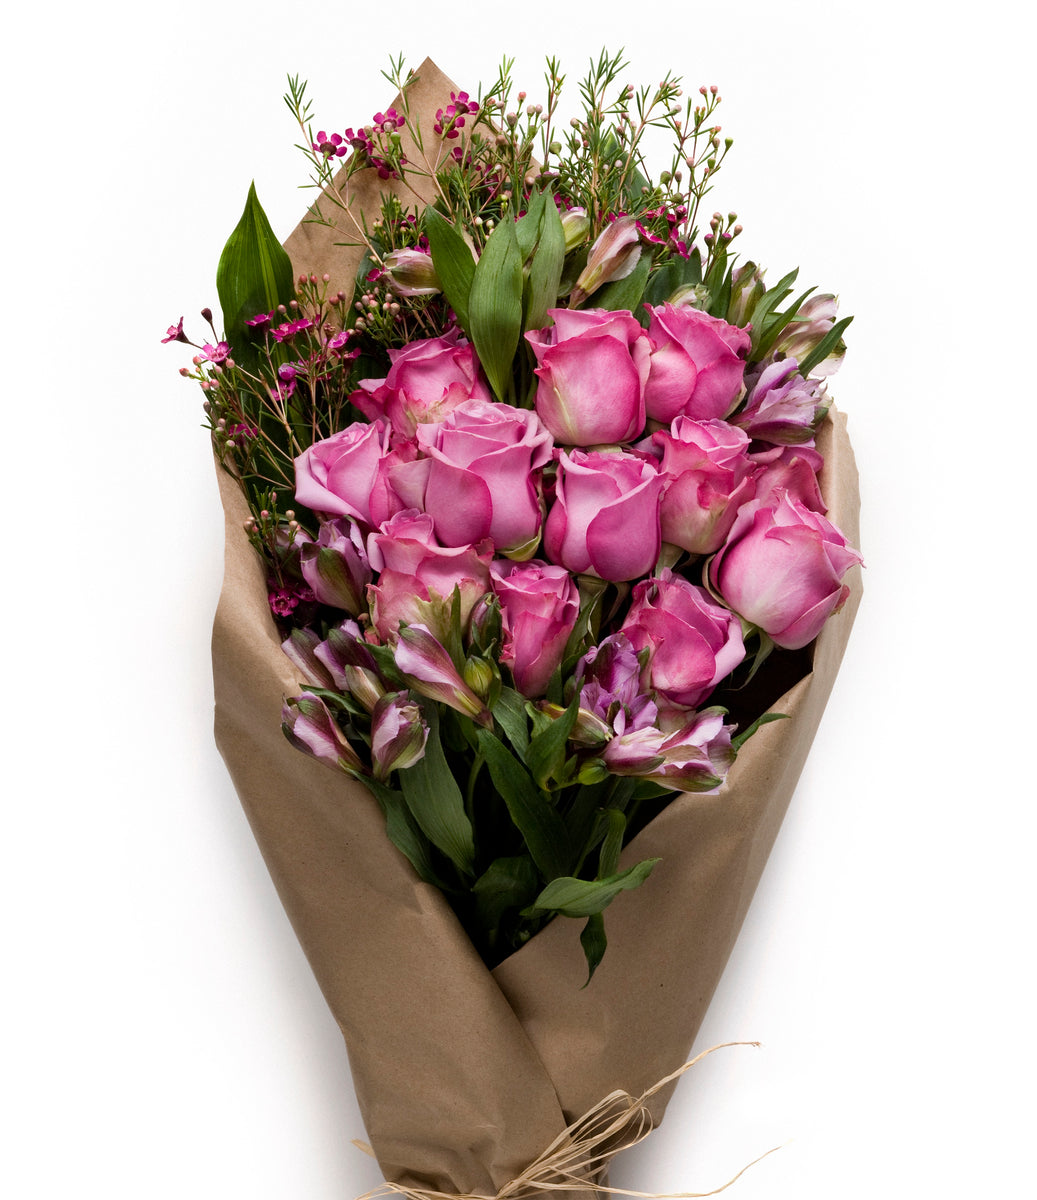 Beautiful Bouquet in Pink Wrapping Paper. Roses and Other Delicate  Beautiful Flowers Stock Photo - Image of bloom, decoration: 142162412